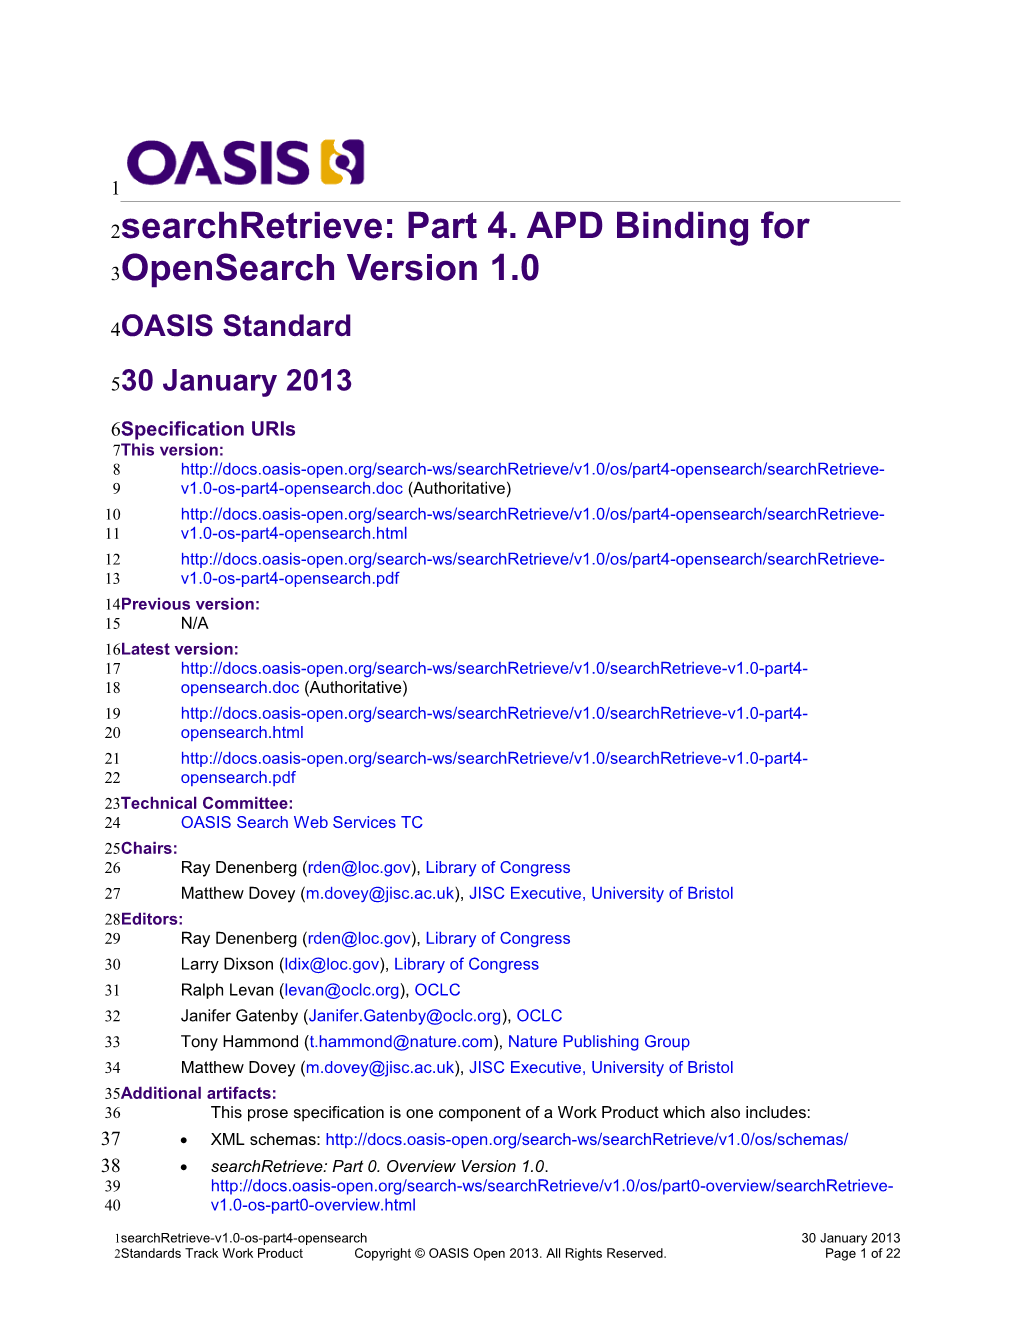 Searchretrieve: Part 4. APD Binding for Opensearch Version 1.0